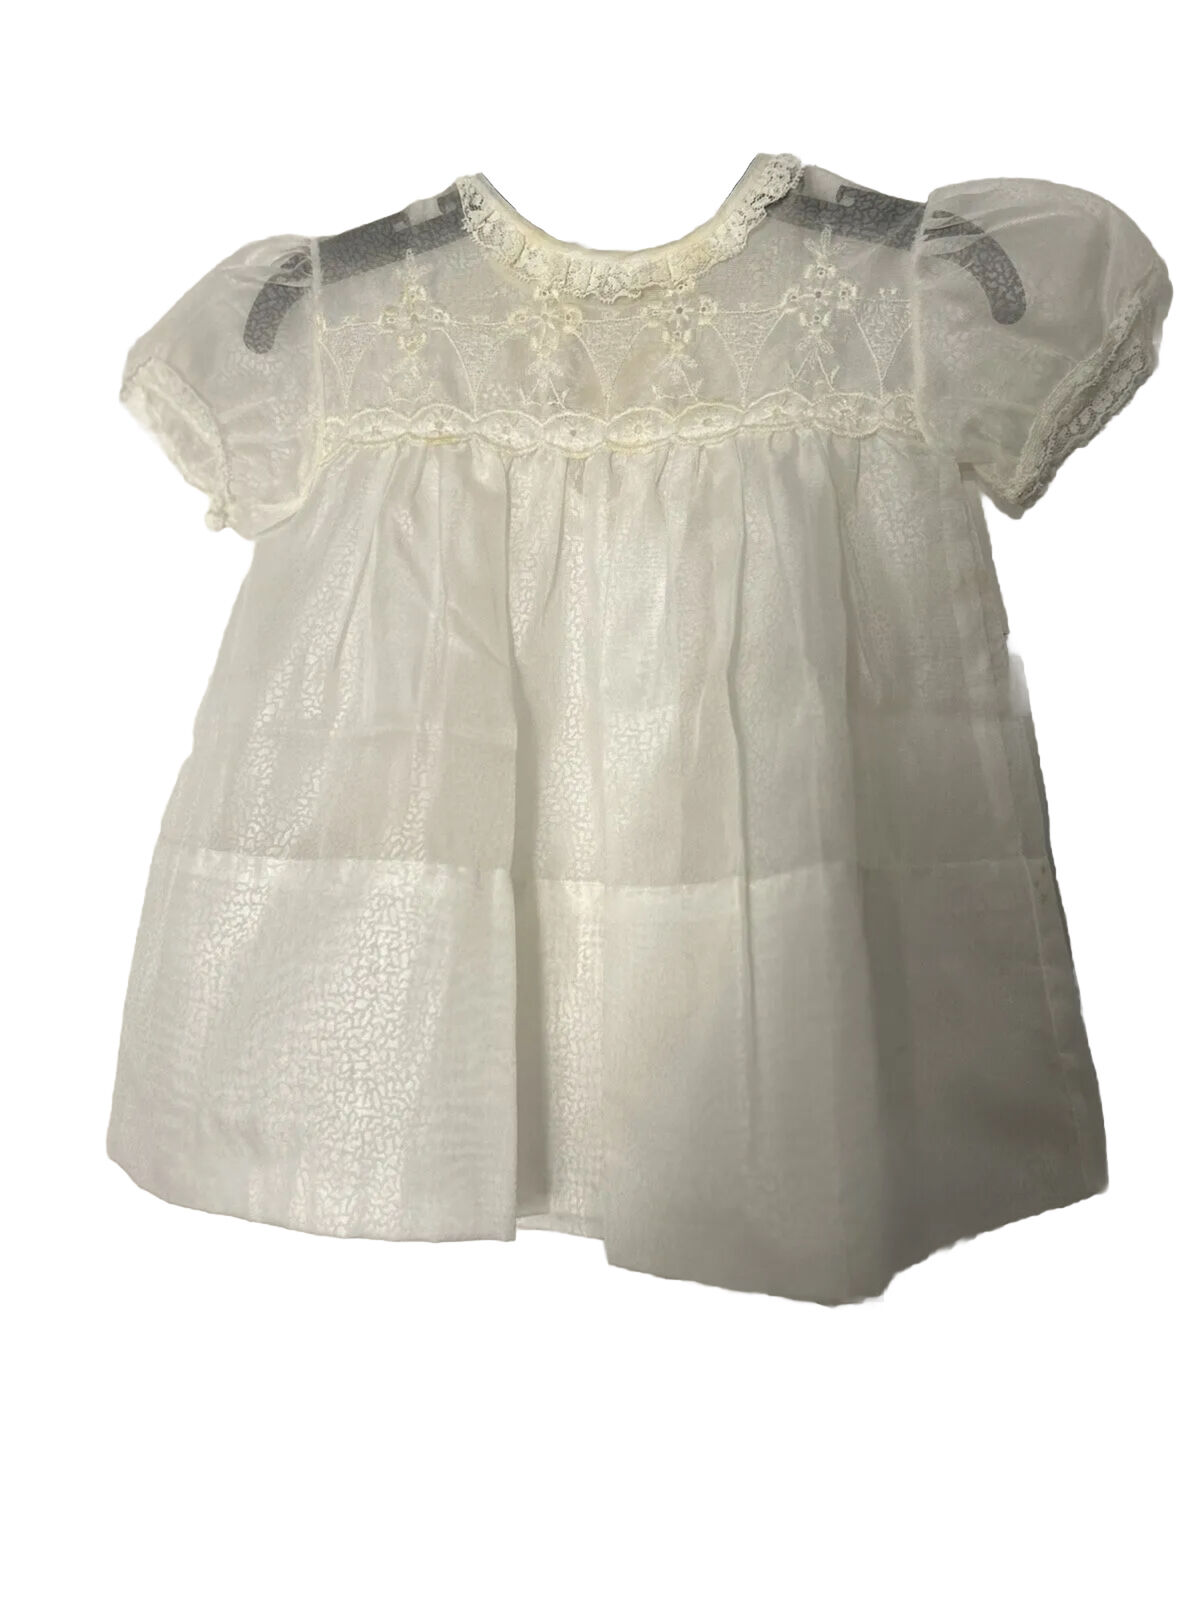 VIntage 1960’s Baby Girl  White Party Dress Sheer  & Lace Shimmer